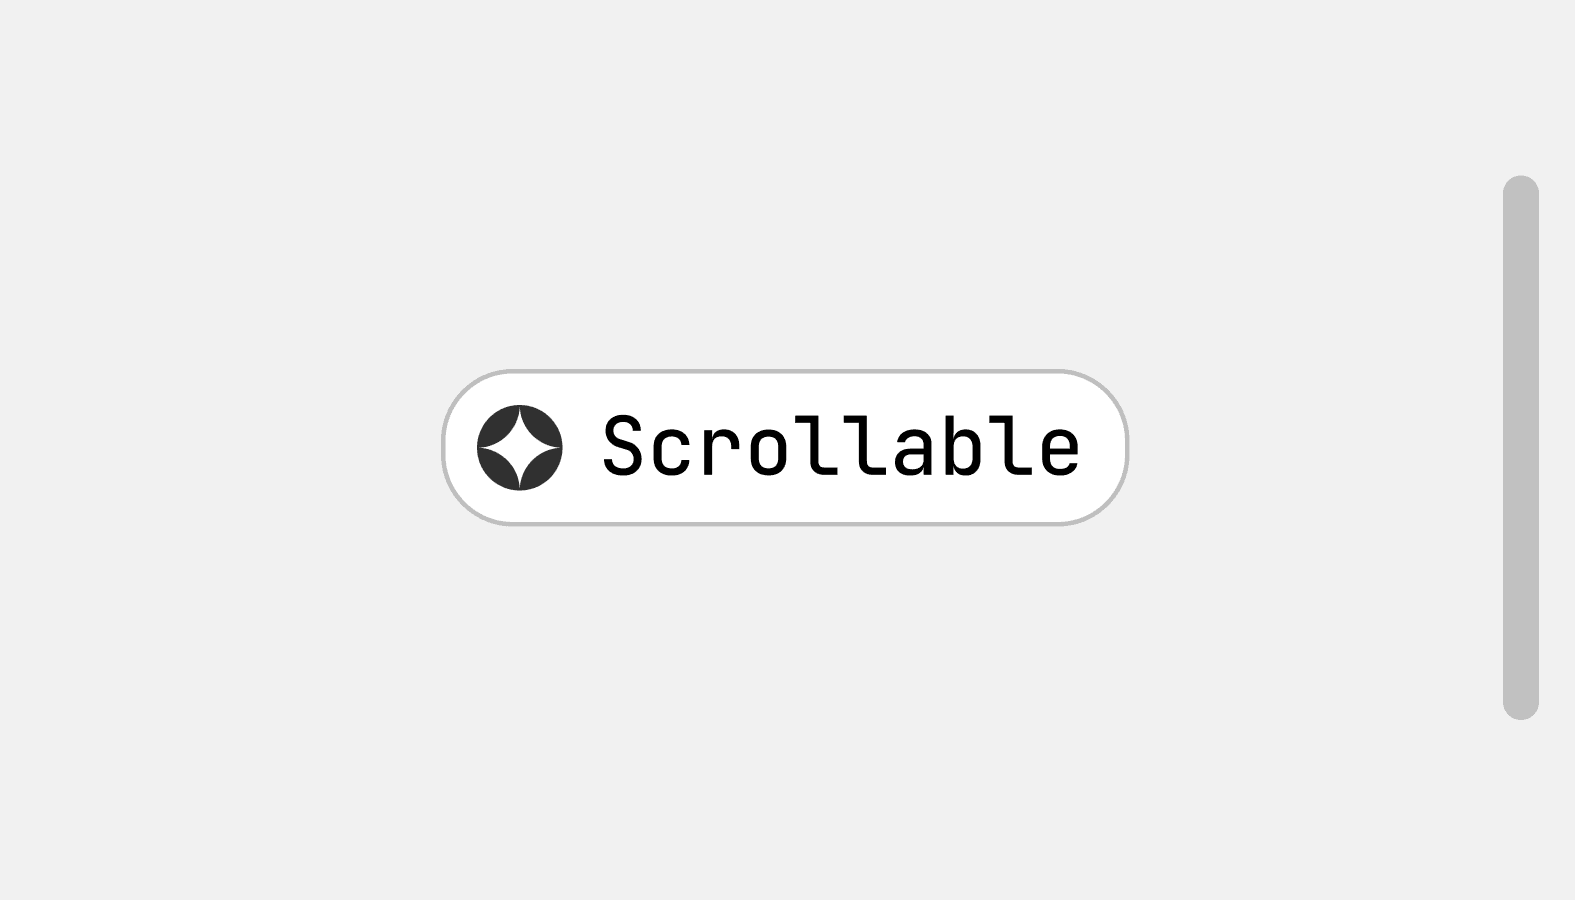 Screenshot of the scrollable component